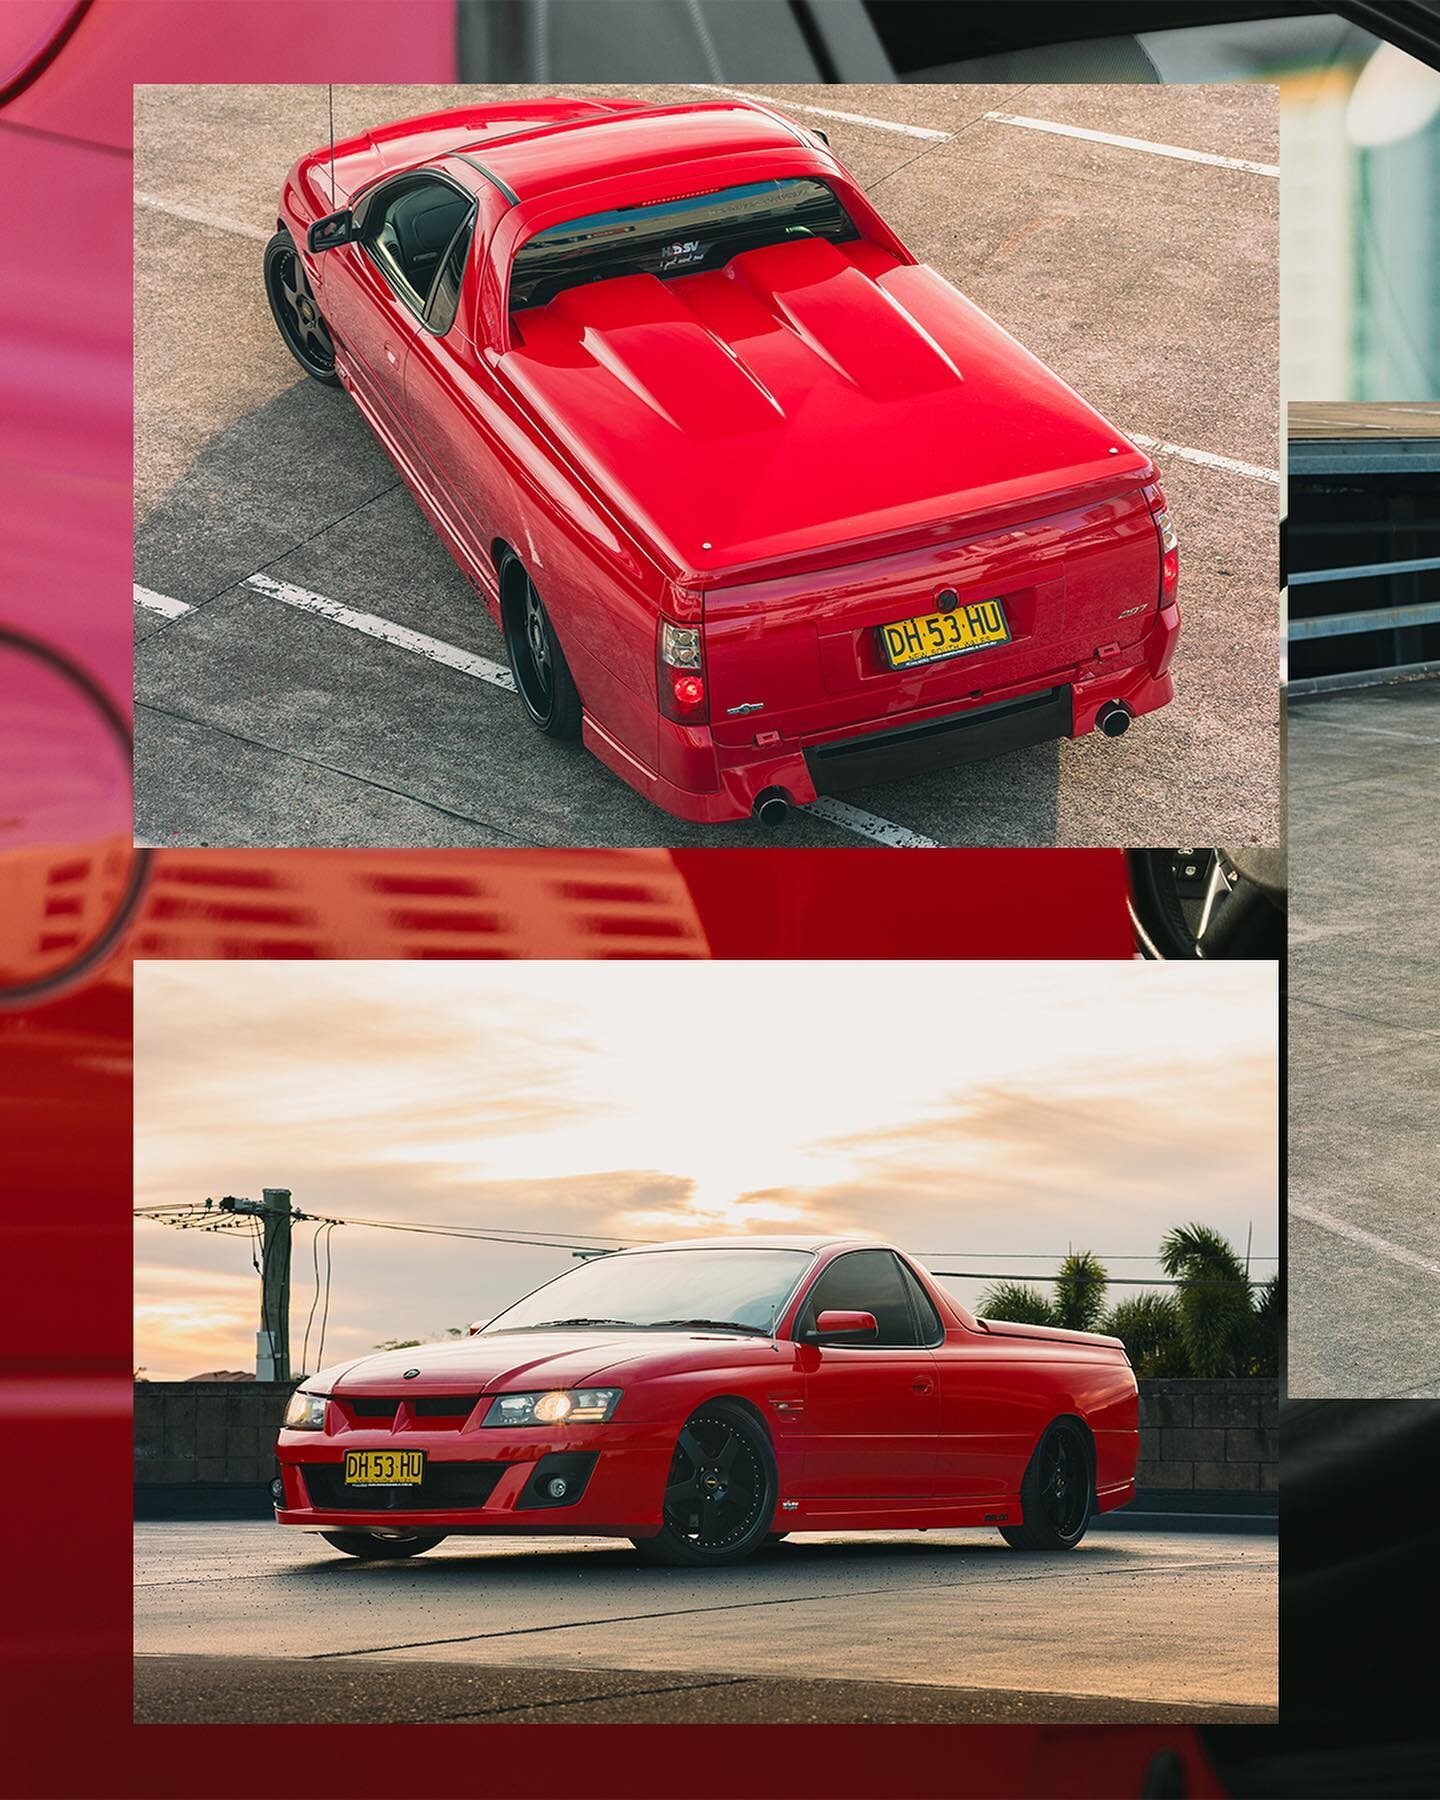 Brand new POV out on my YouTube right now! In this one I finally get some car photography content on the channel shooting Mingo&rsquo;s red HSV Maloo! 🚘 
.
.
.
.
.

#photooftheday #photography #carphotography #carporn #cars #cargram #canonaustralia 